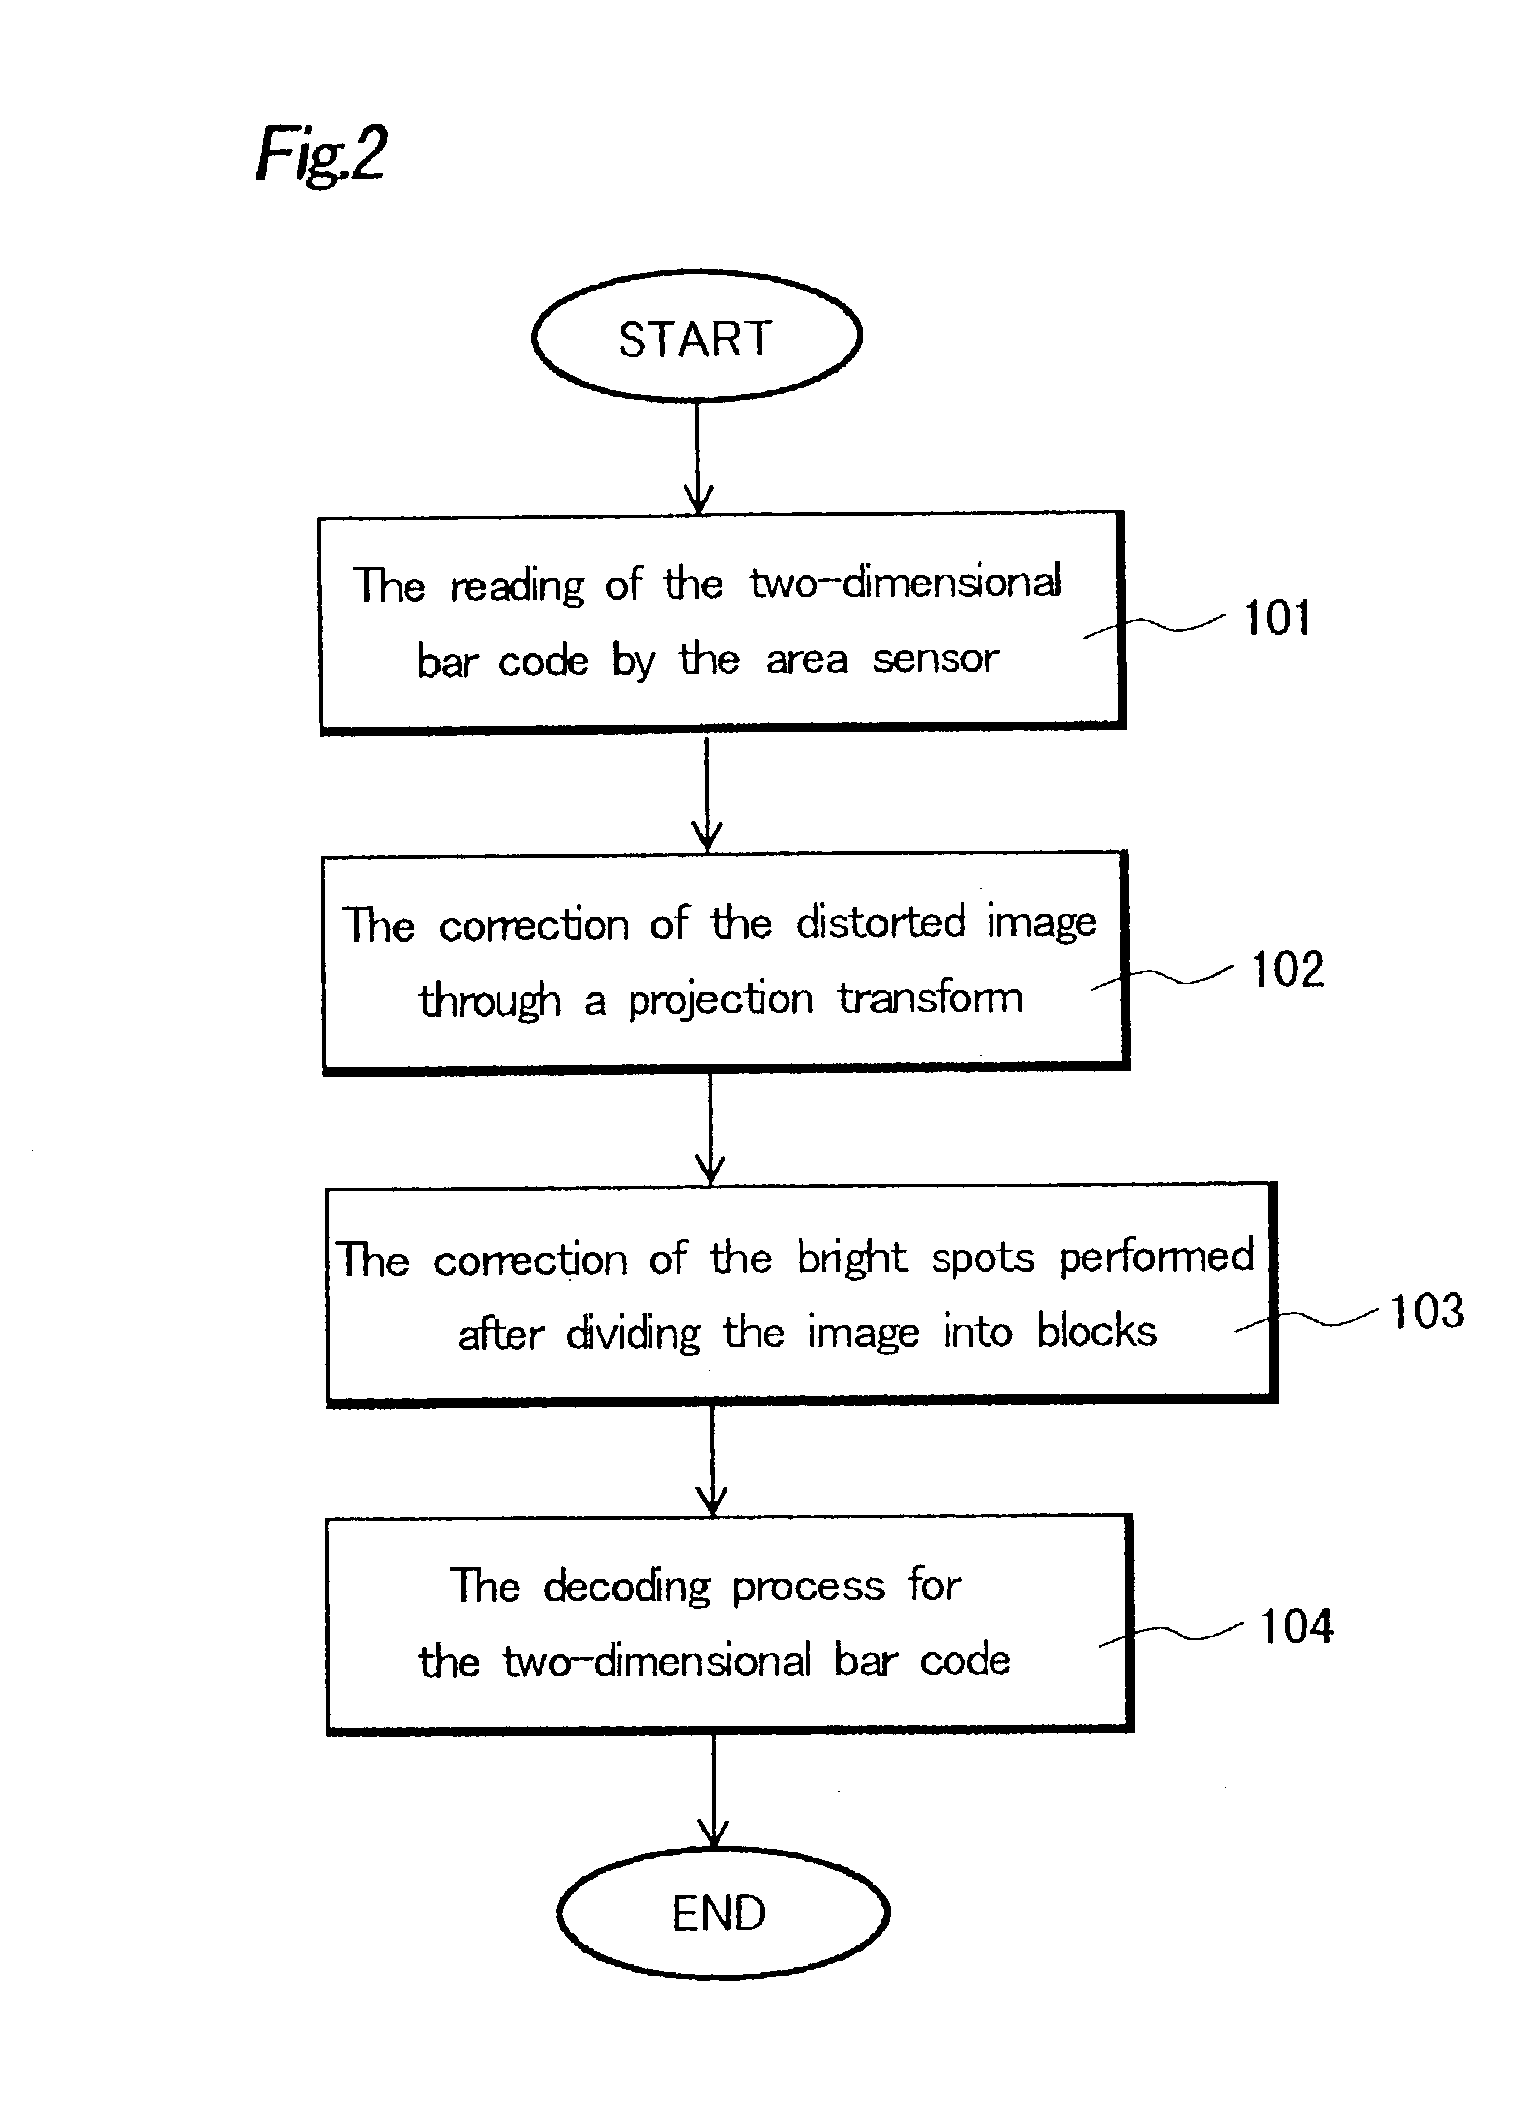 Reading method of the two-dimensional bar code